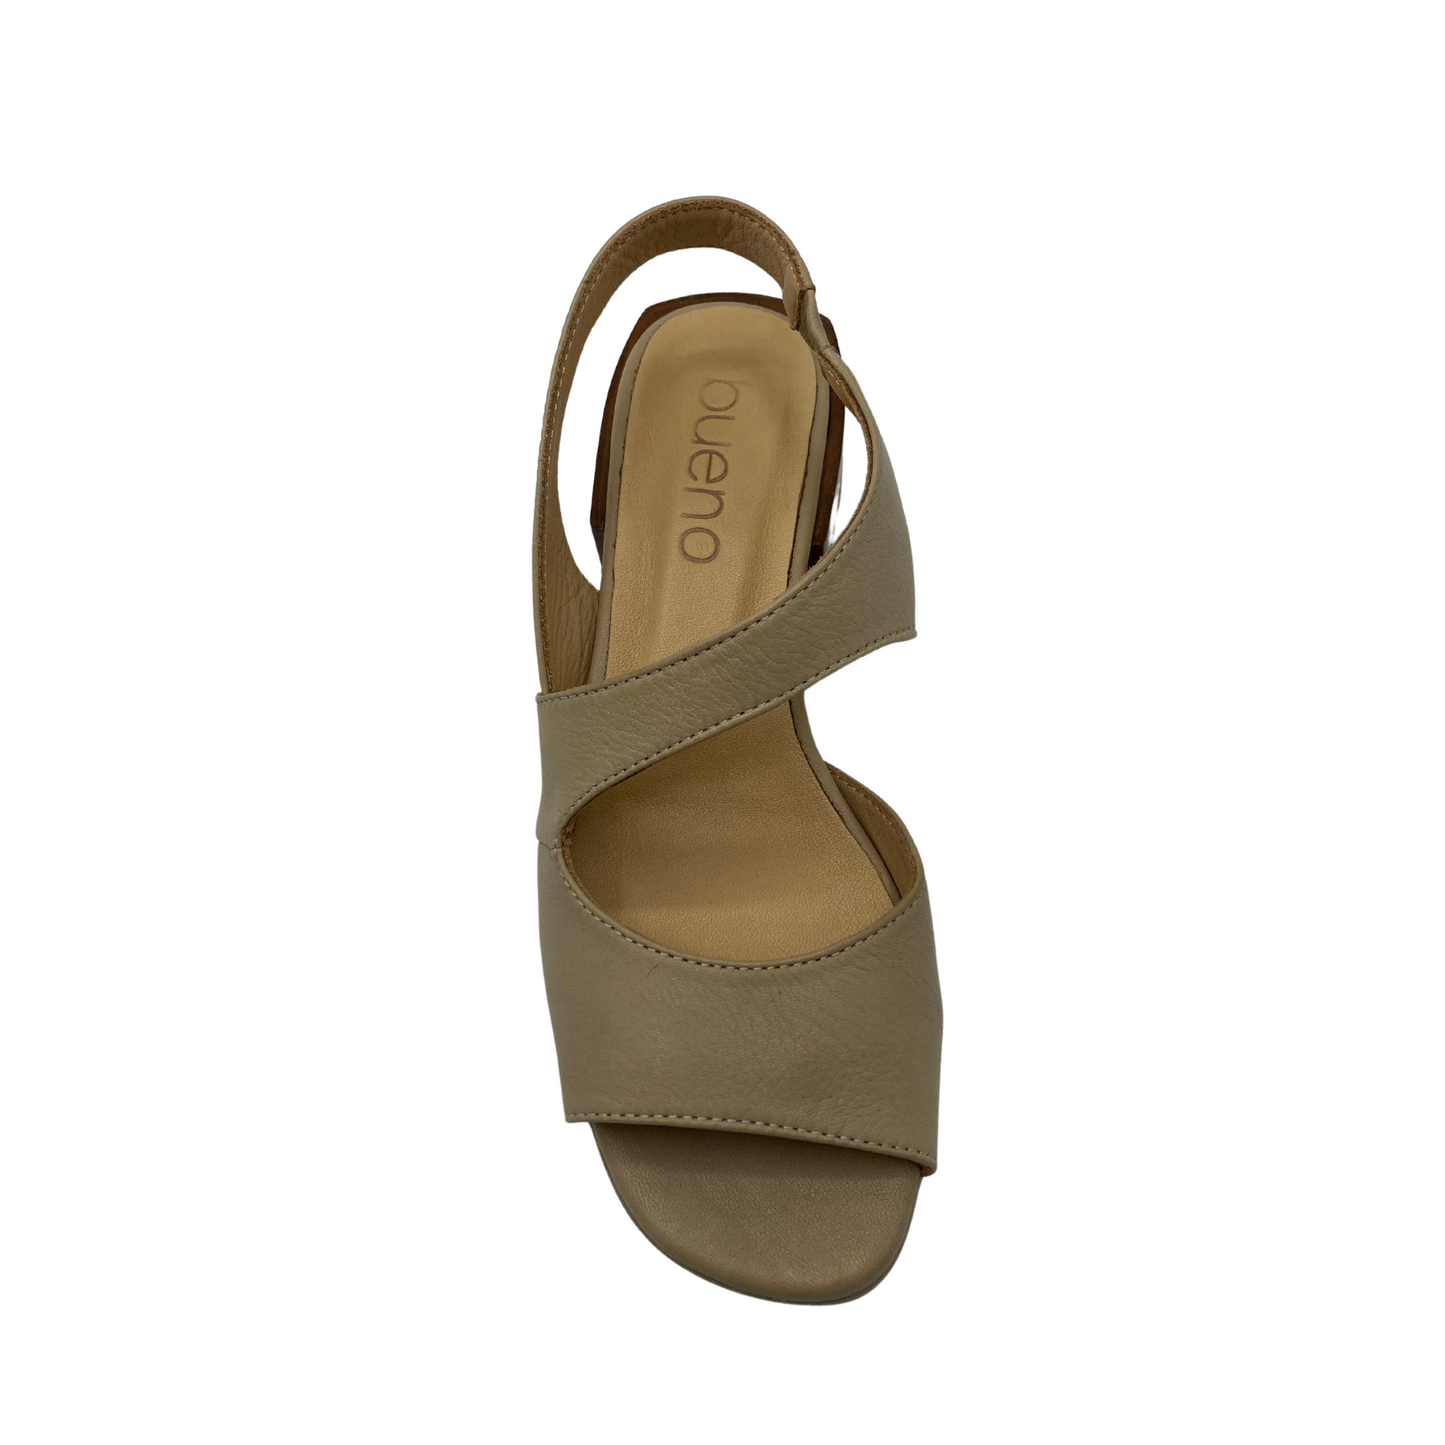 Top down view of taupe sandal by Bueno.  Slip on style with open toe and back strap wth elastic stretch segment.